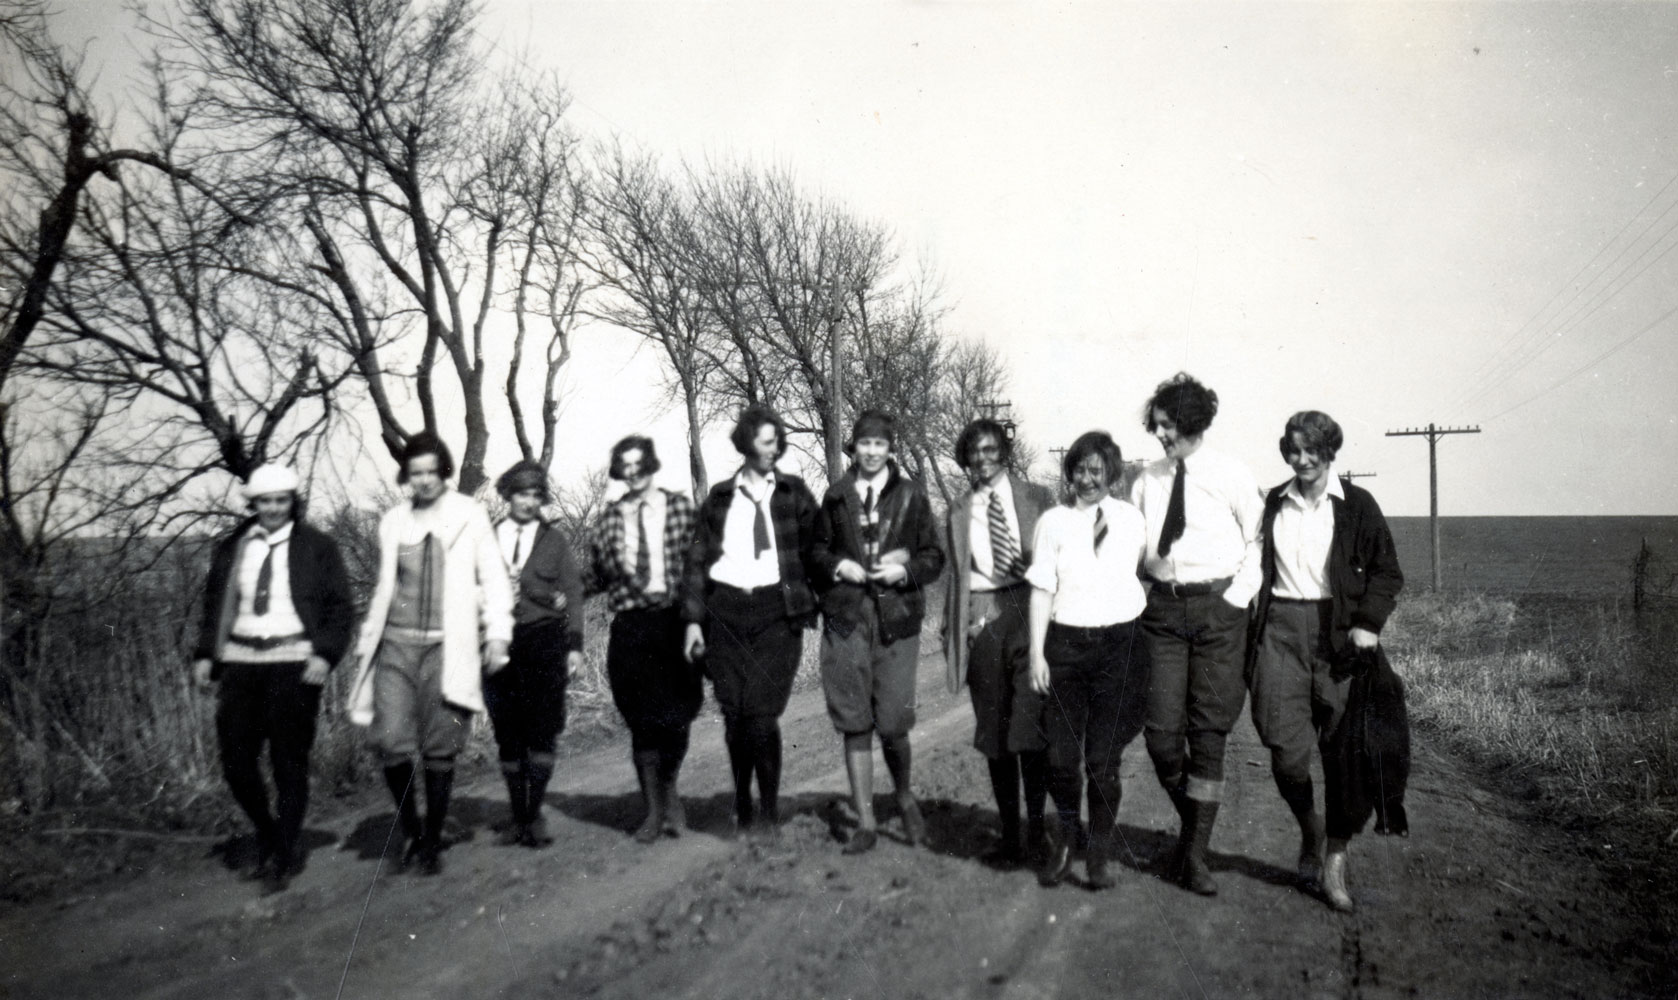 A black and white image of a group of women walking down a path